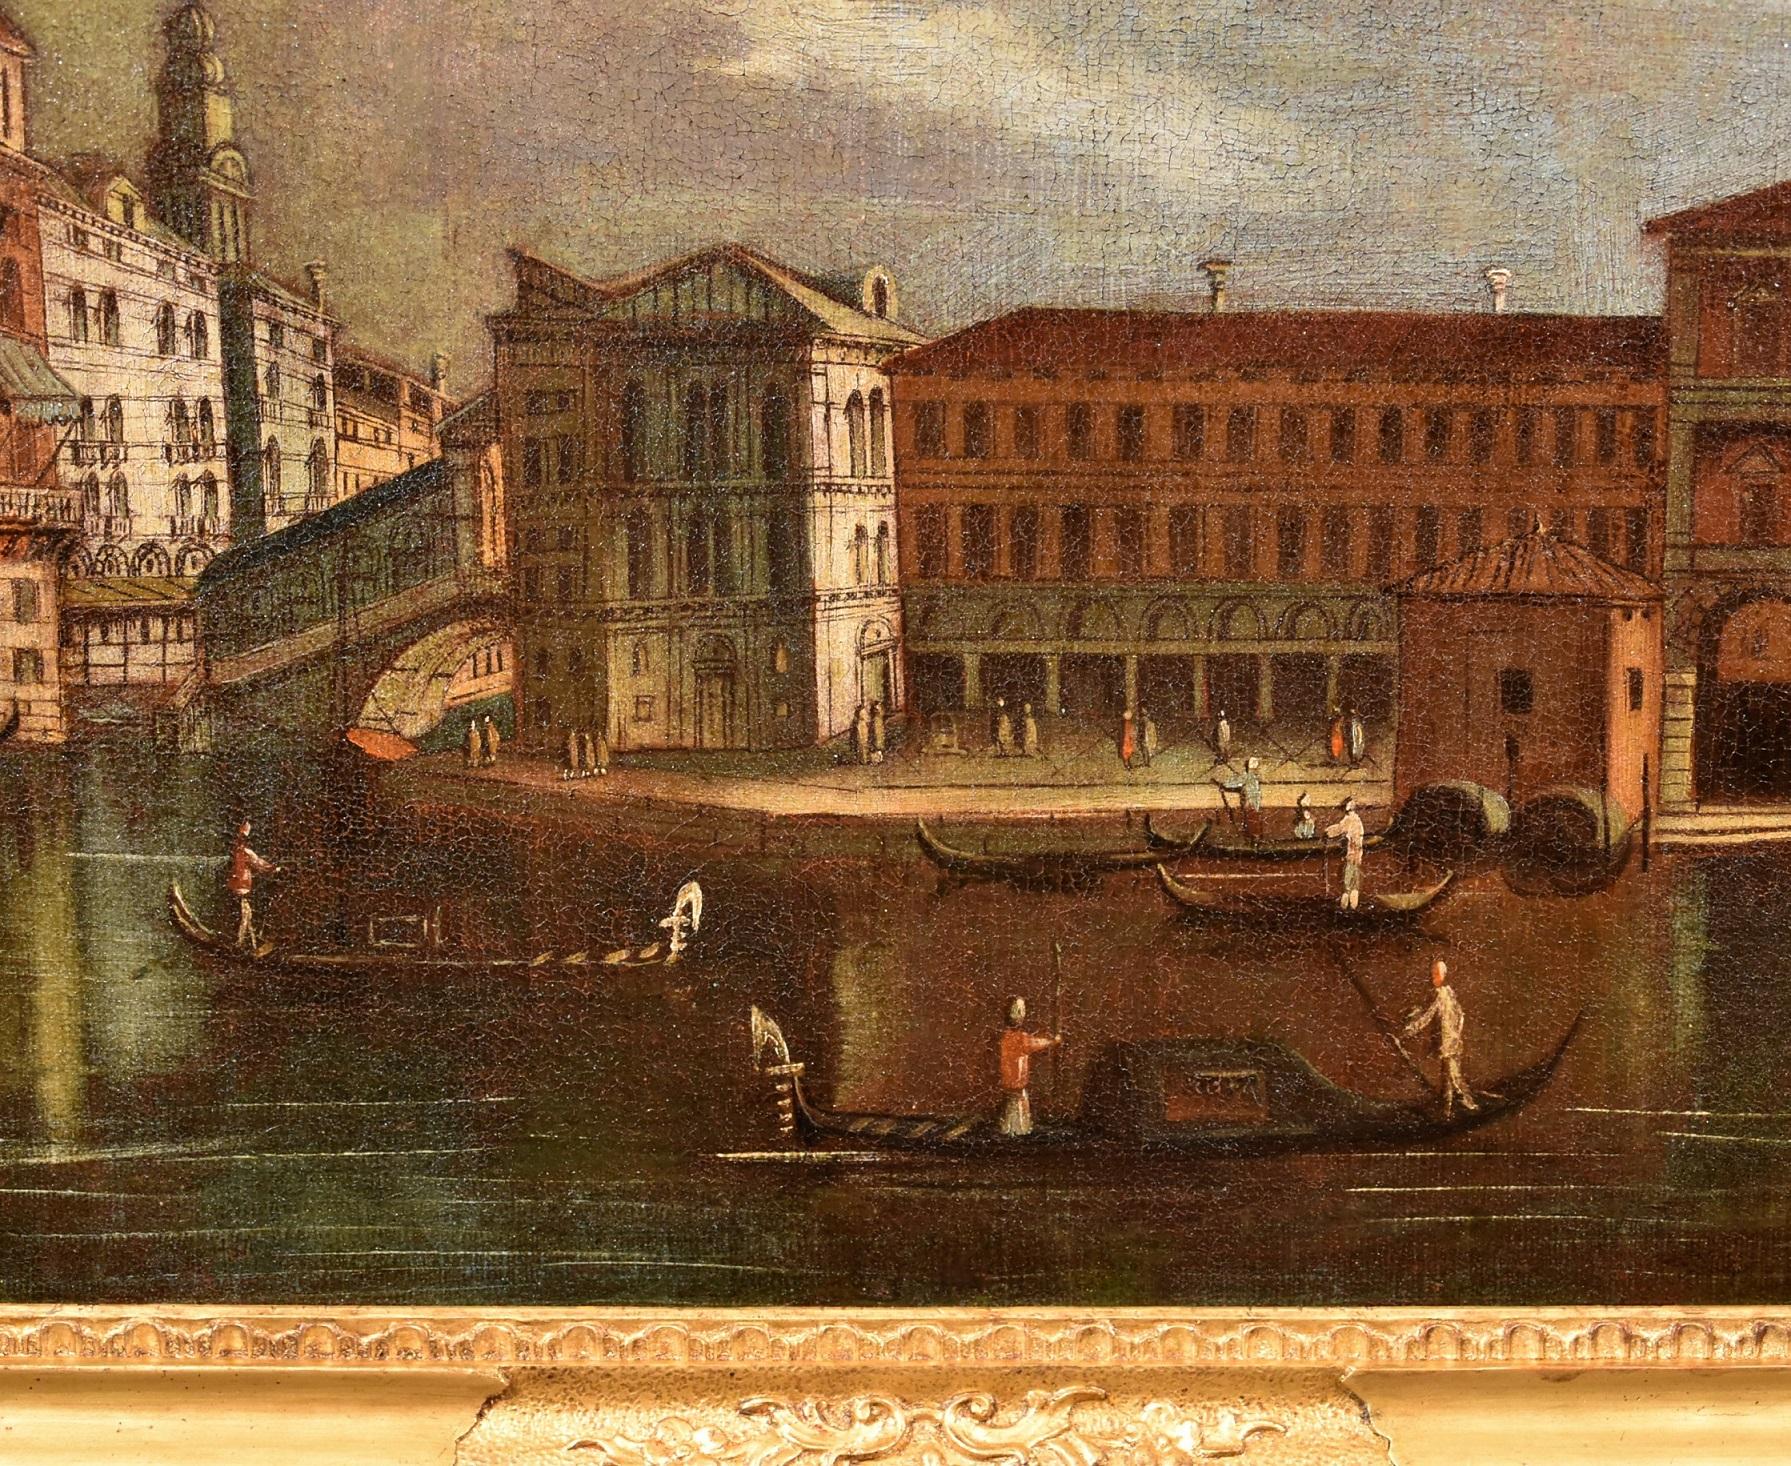 Tironi Venice Grand Canal Landscape Paint Oil on canvas Old master 18th Century 2